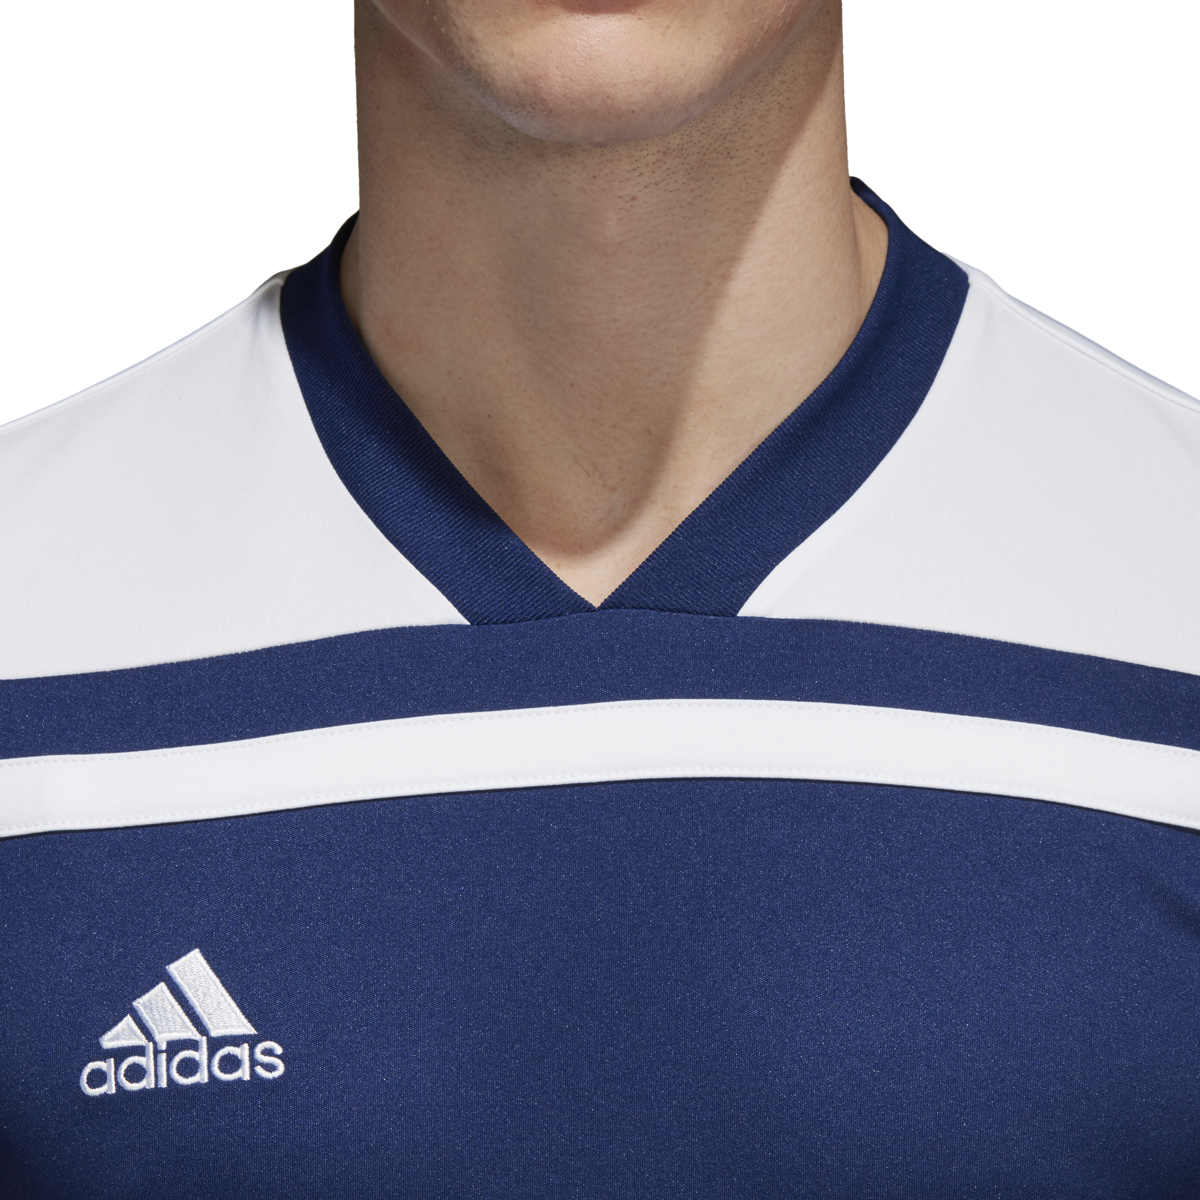 Adidas Mens Soccer Regista 18 Jersey Adidas - Ships Directly From Adidas - image 4 of 6